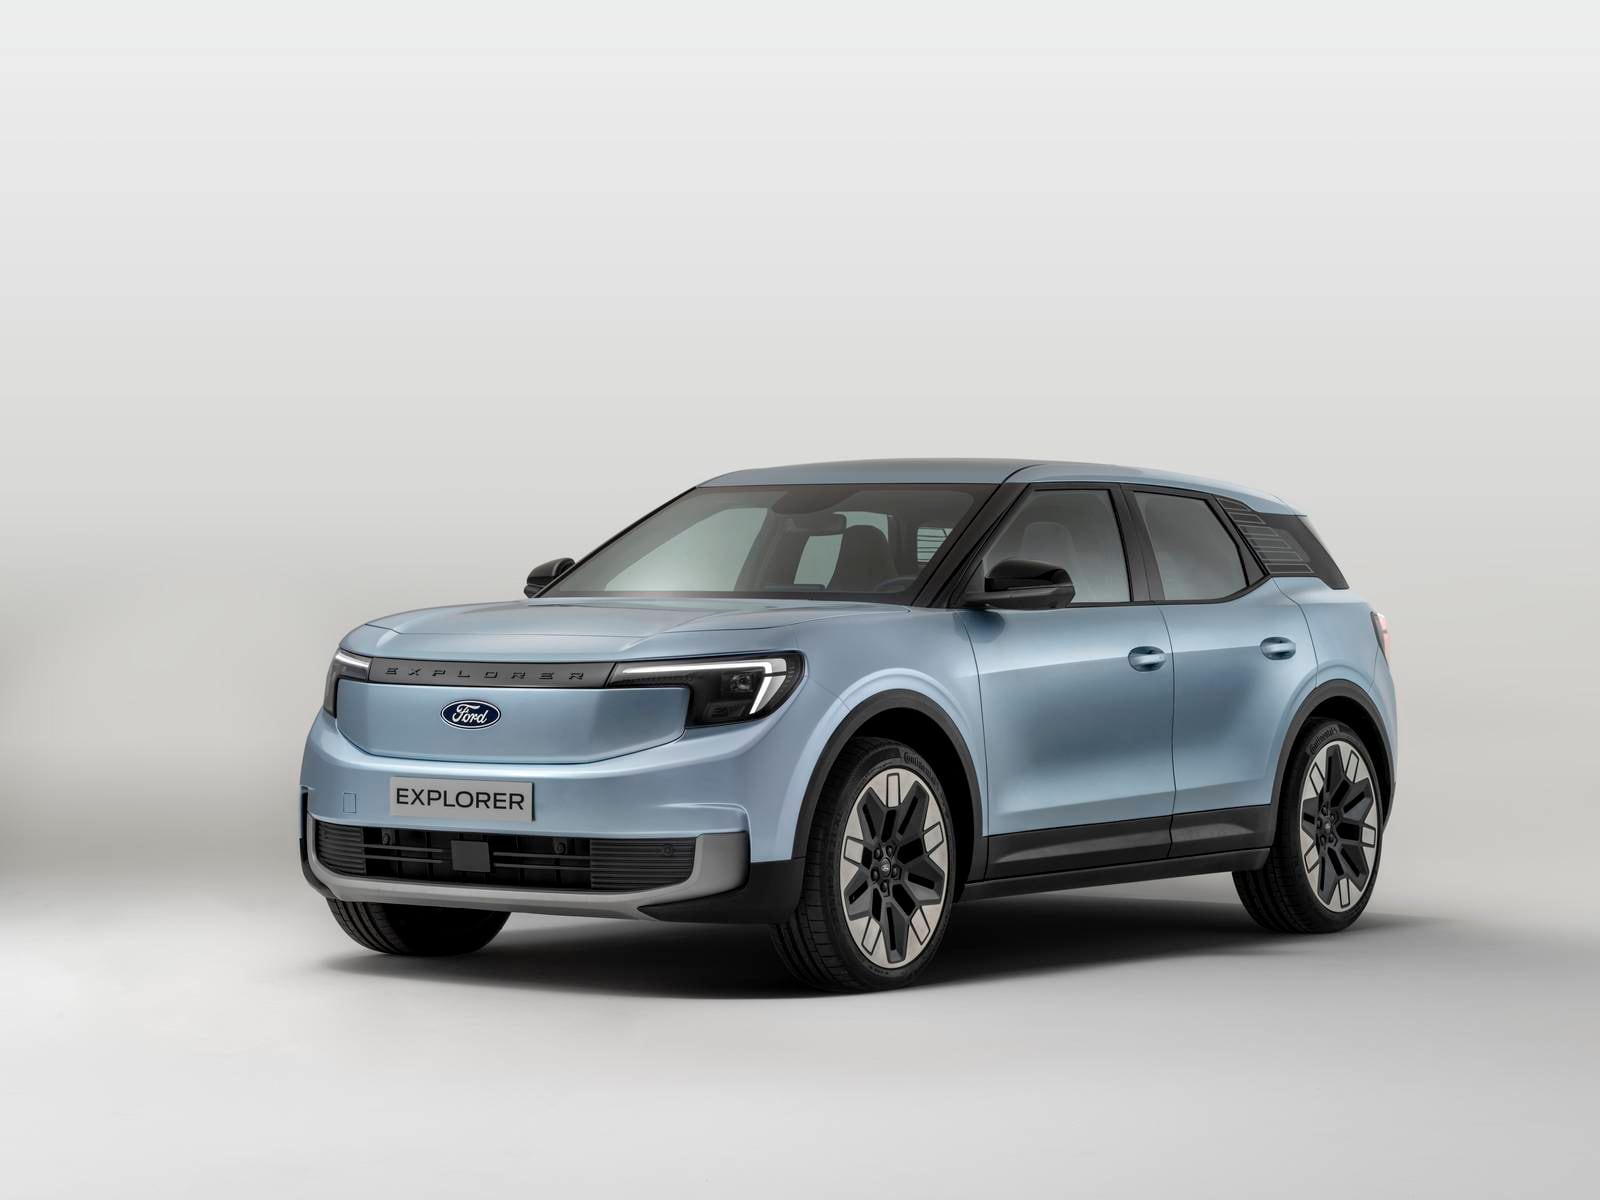 New all-electric Ford Explorer EV crossover